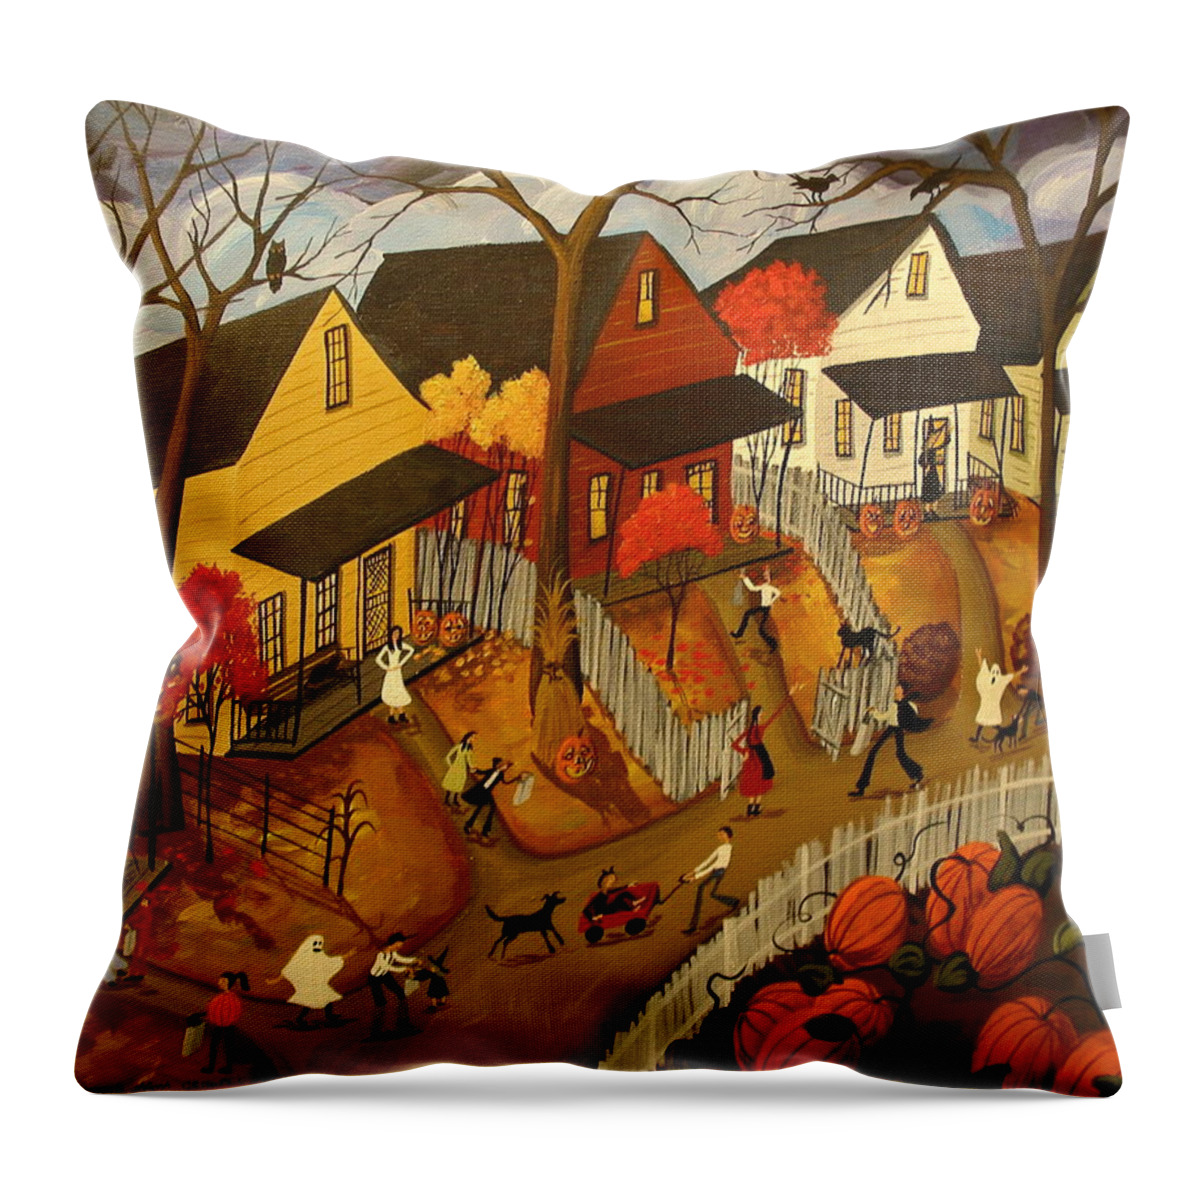 Folk Art Throw Pillow featuring the painting Trick Or Treat 2012 by Debbie Criswell